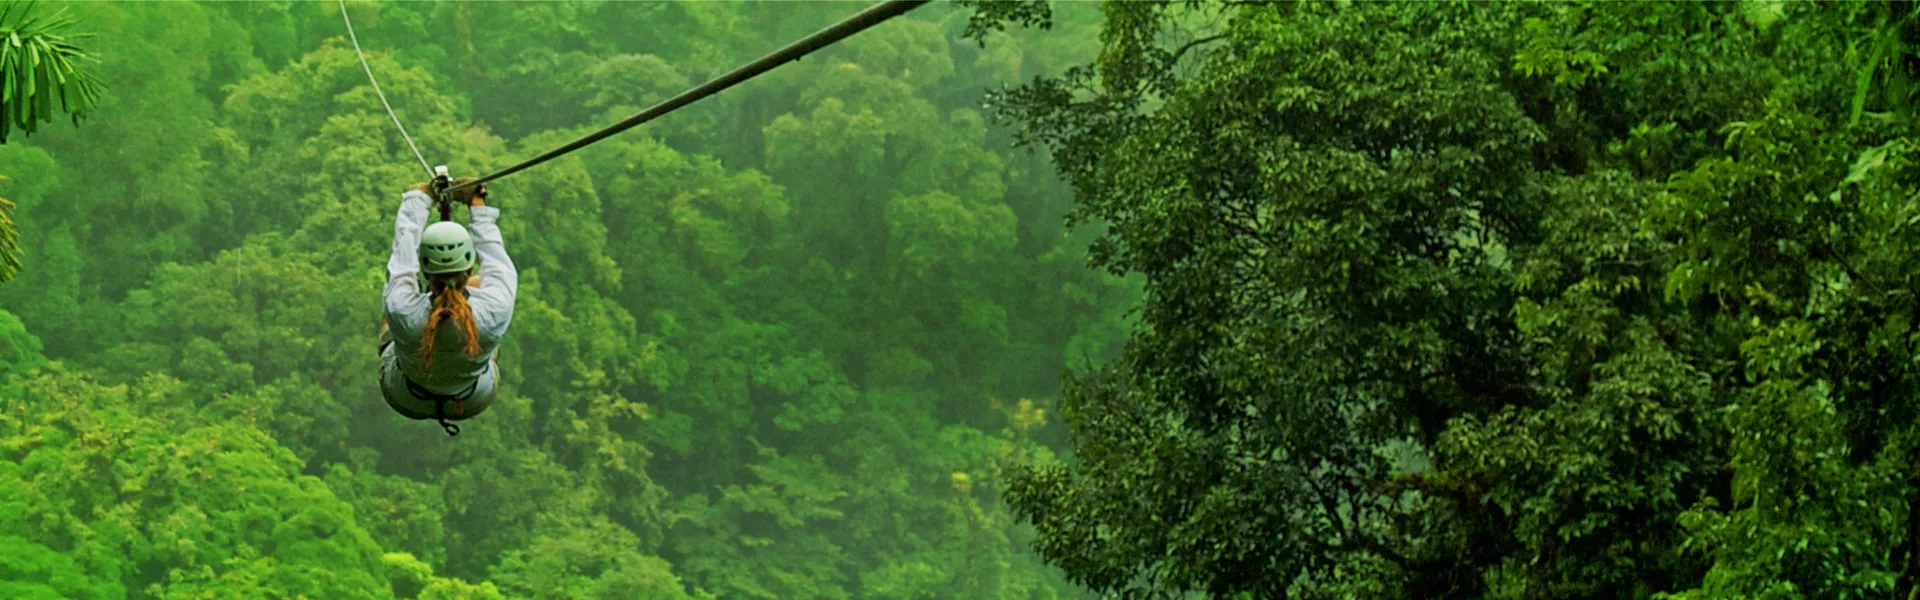 Helmeted woman ziplines downhill in the middle of nature